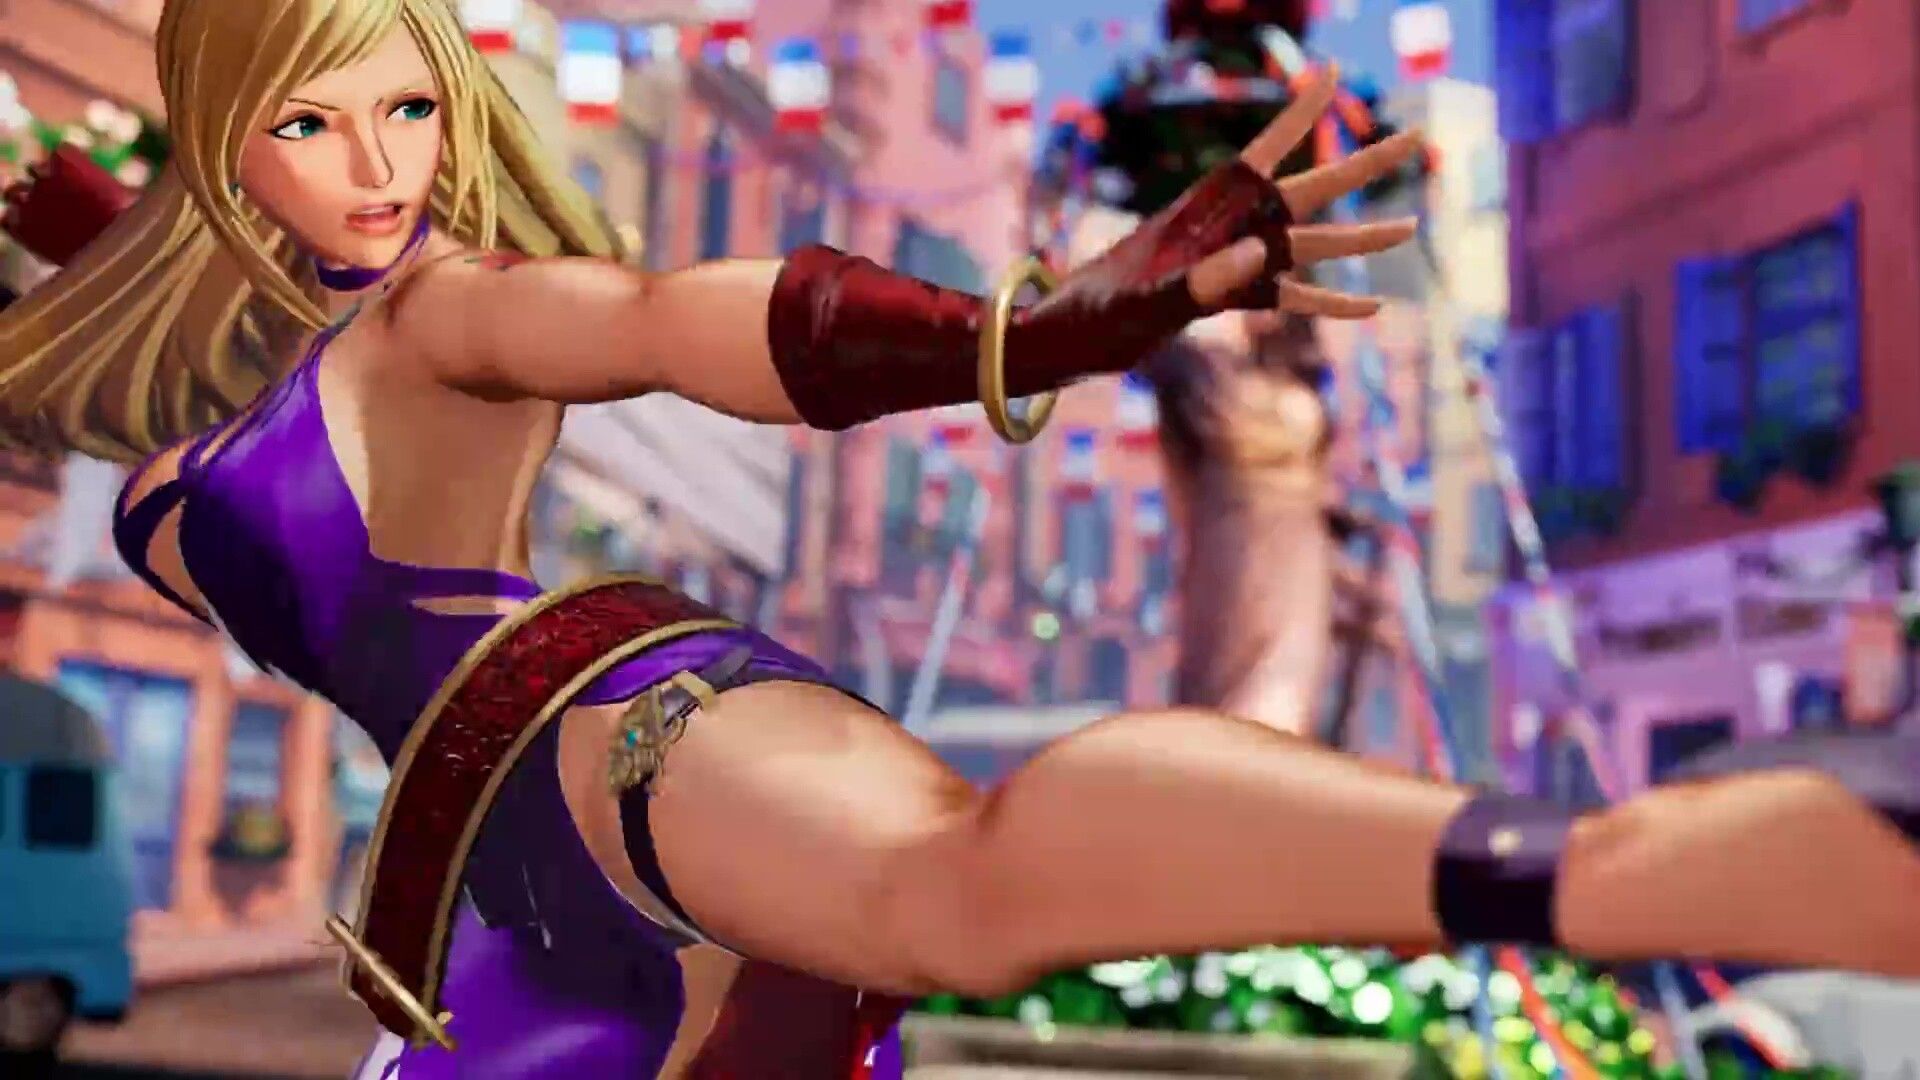 THE KING OF FIGHTERS XV B. Jenny enters the DLC in an erotic dress with and rounded thighs 15